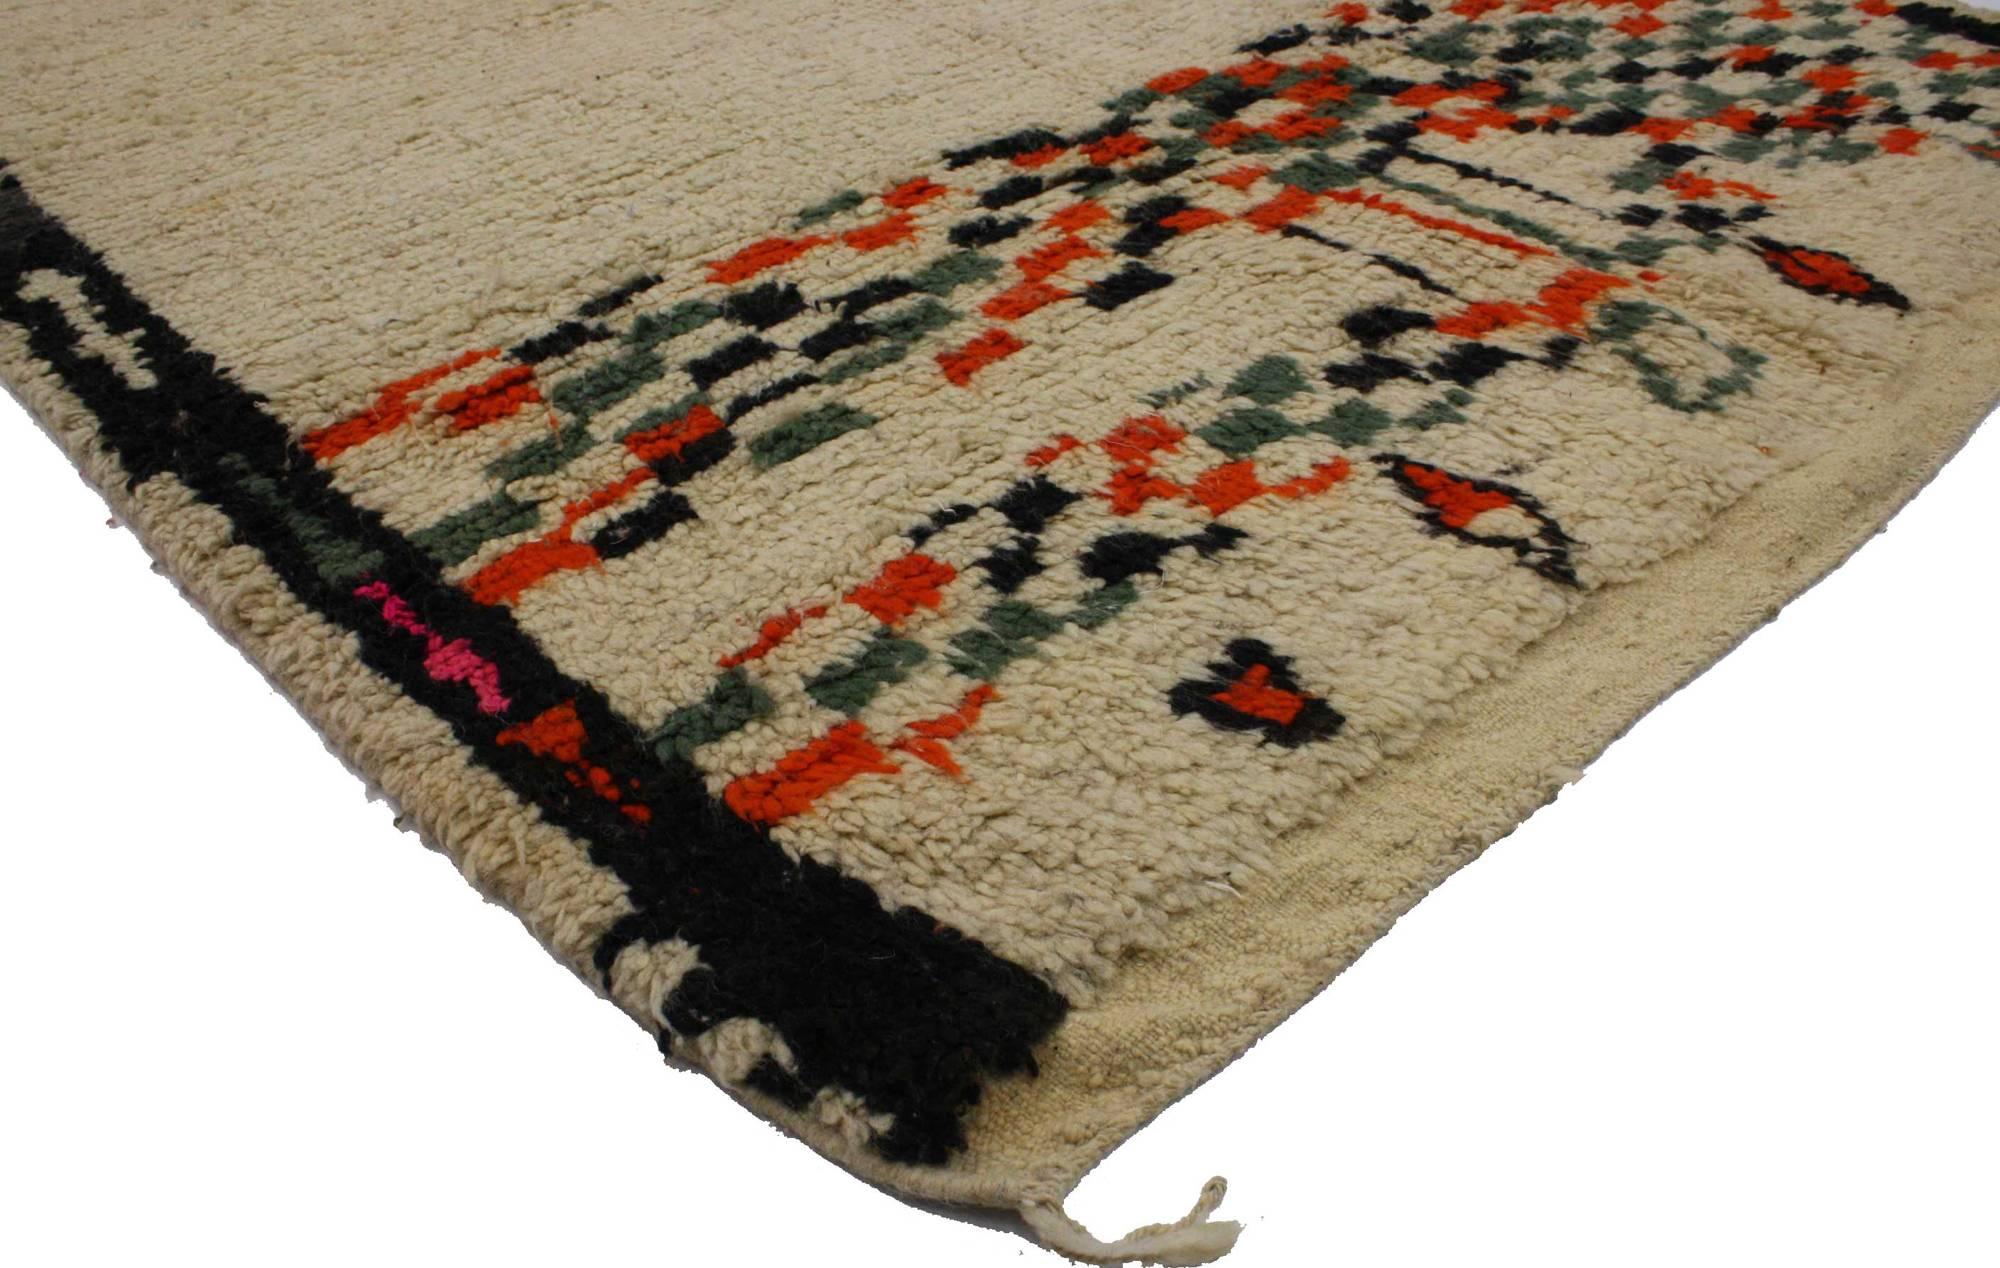 20307 Vintage Berber Moroccan Rug with Tribal Style 05'01 x 07'03. With a distinctive tribal design and modern style, this hand-knotted wool vintage Berber Moroccan rug displays geometric shapes galore, from diamonds to rods and a checkerboard